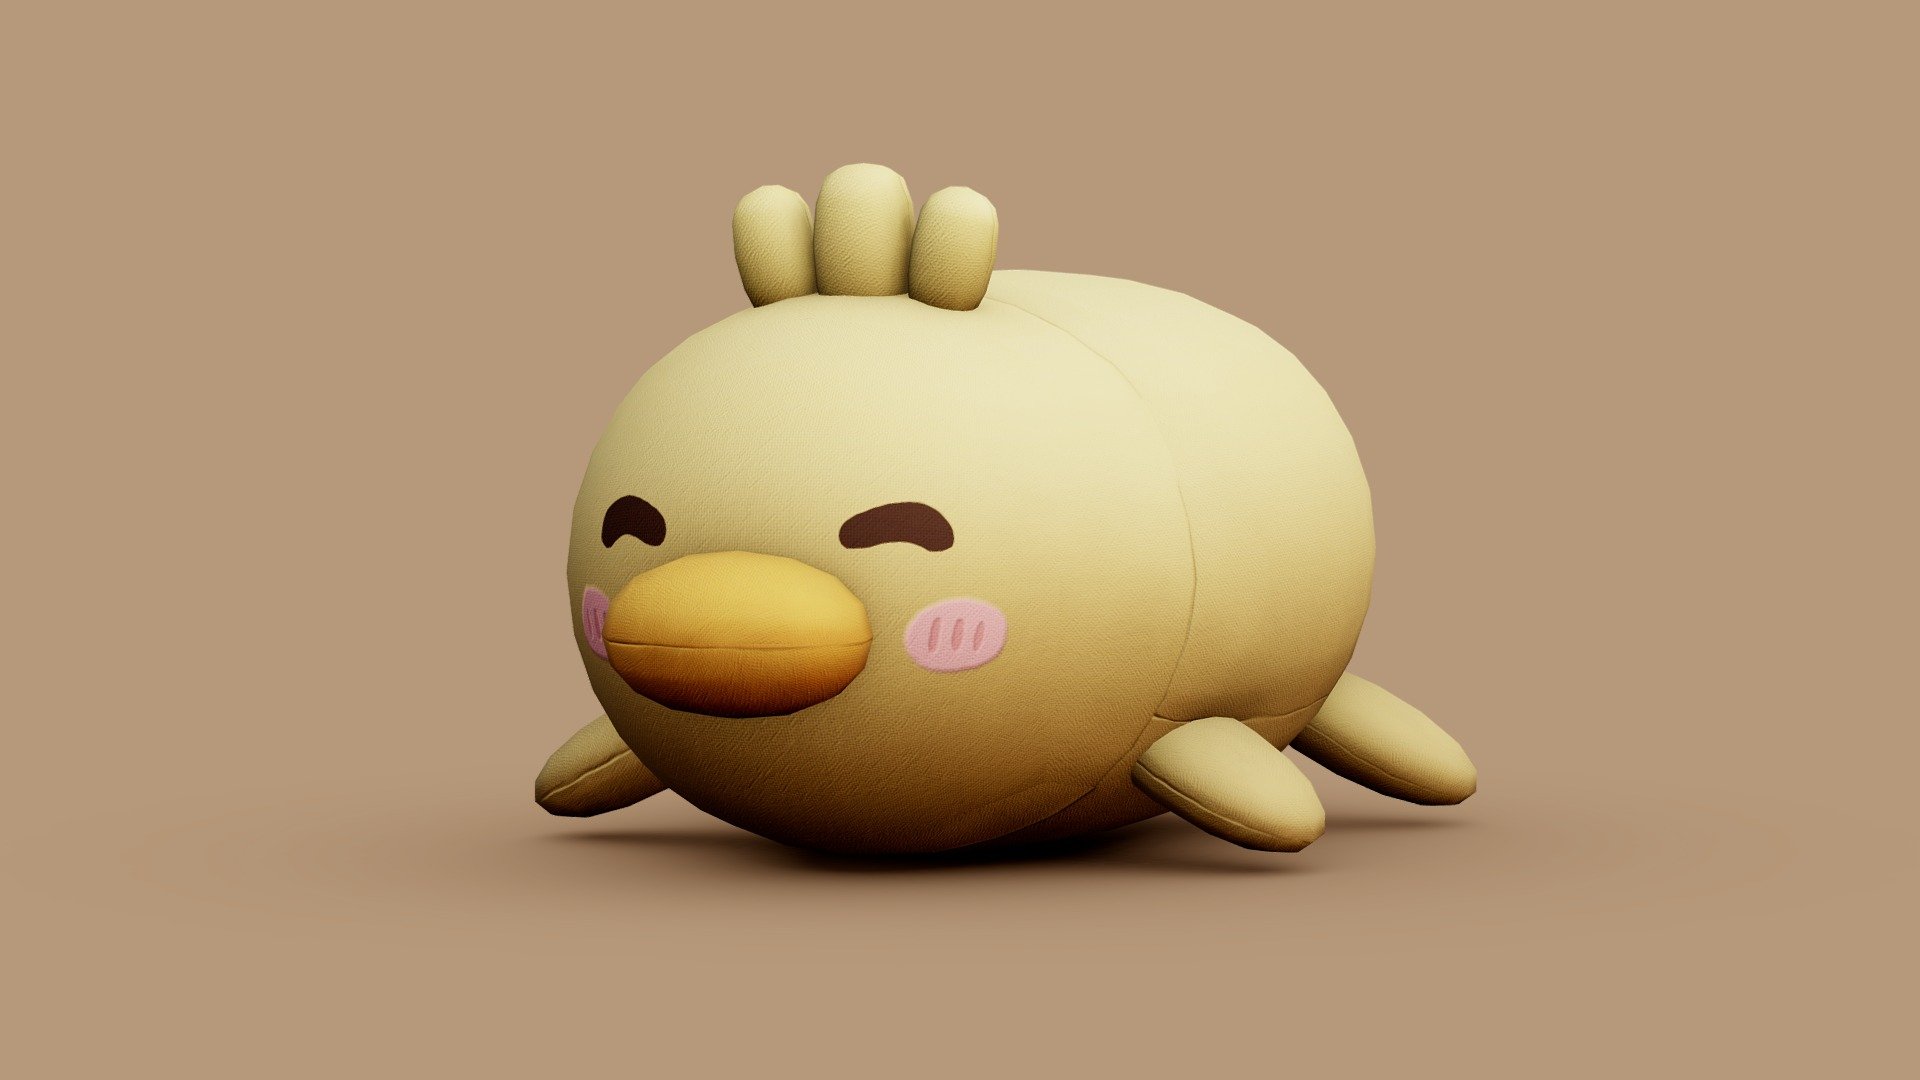 Low Poly Duck Plush Toy for your renders and games

Textures:

Diffuse color, Roughness, Normal, AO

All textures are 2K

Files Formats:

Blend

Fbx

Obj - Duck Plush Toy - Buy Royalty Free 3D model by Vanessa Araújo (@vanessa3d) 3d model